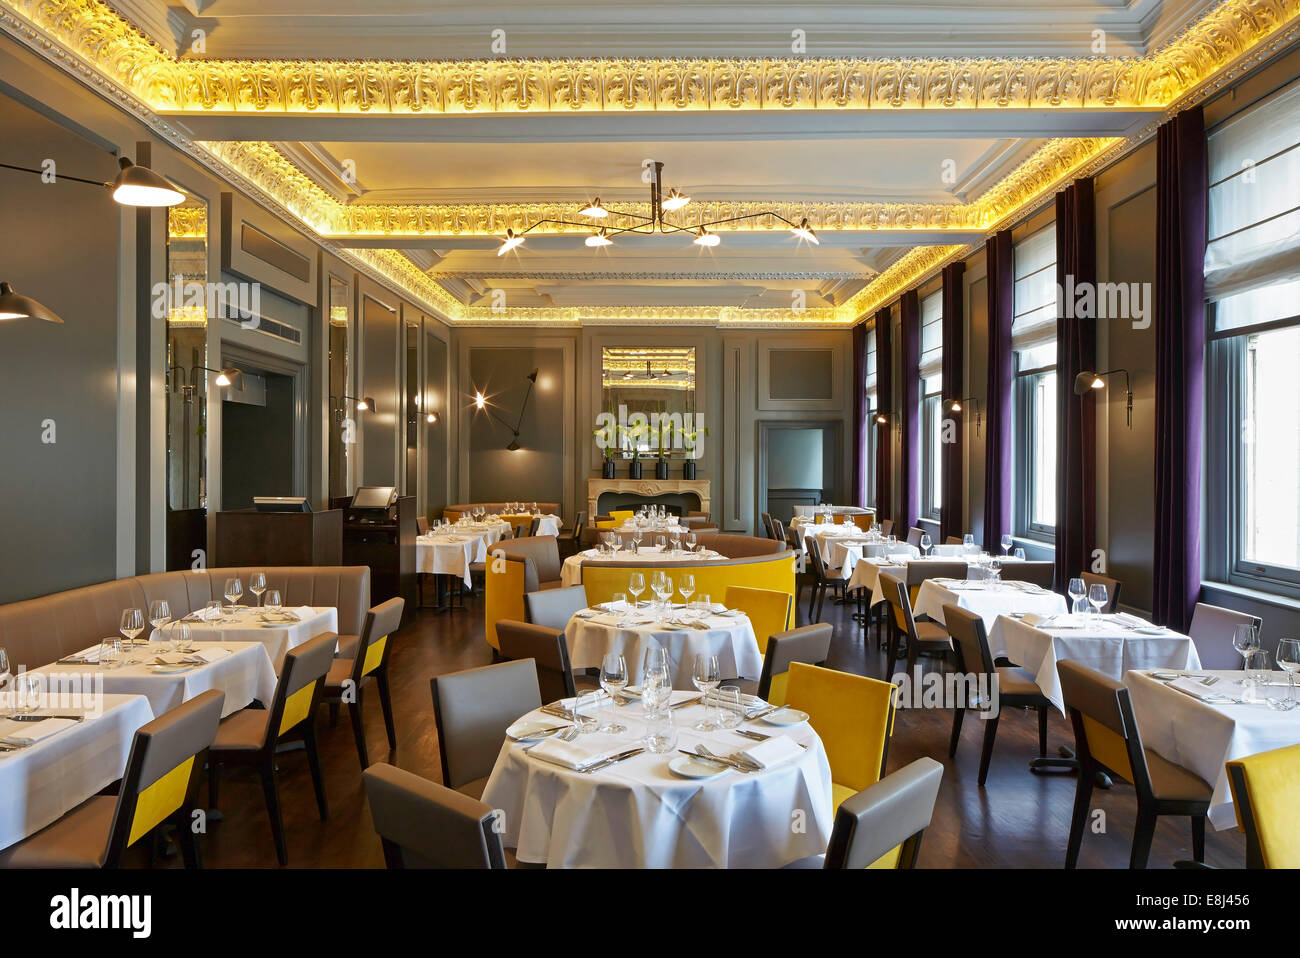 Christopher's, London, United Kingdom. Architect: De Matos Ryan, 2013. Overall view of dining room. Stock Photo